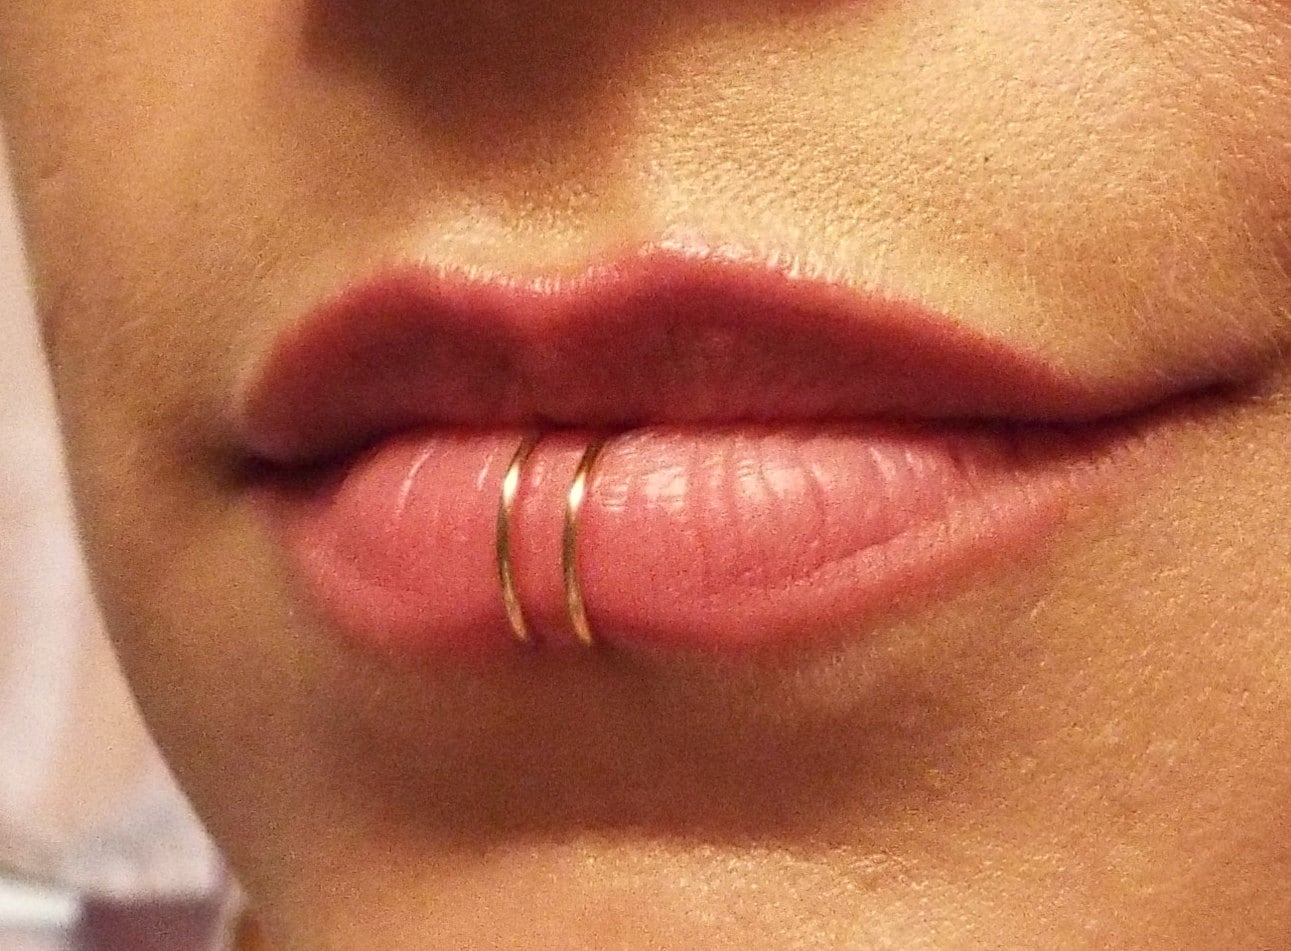 Gold Double Lip Ring Or Nose Ring Fake Body Piercing By Junylie